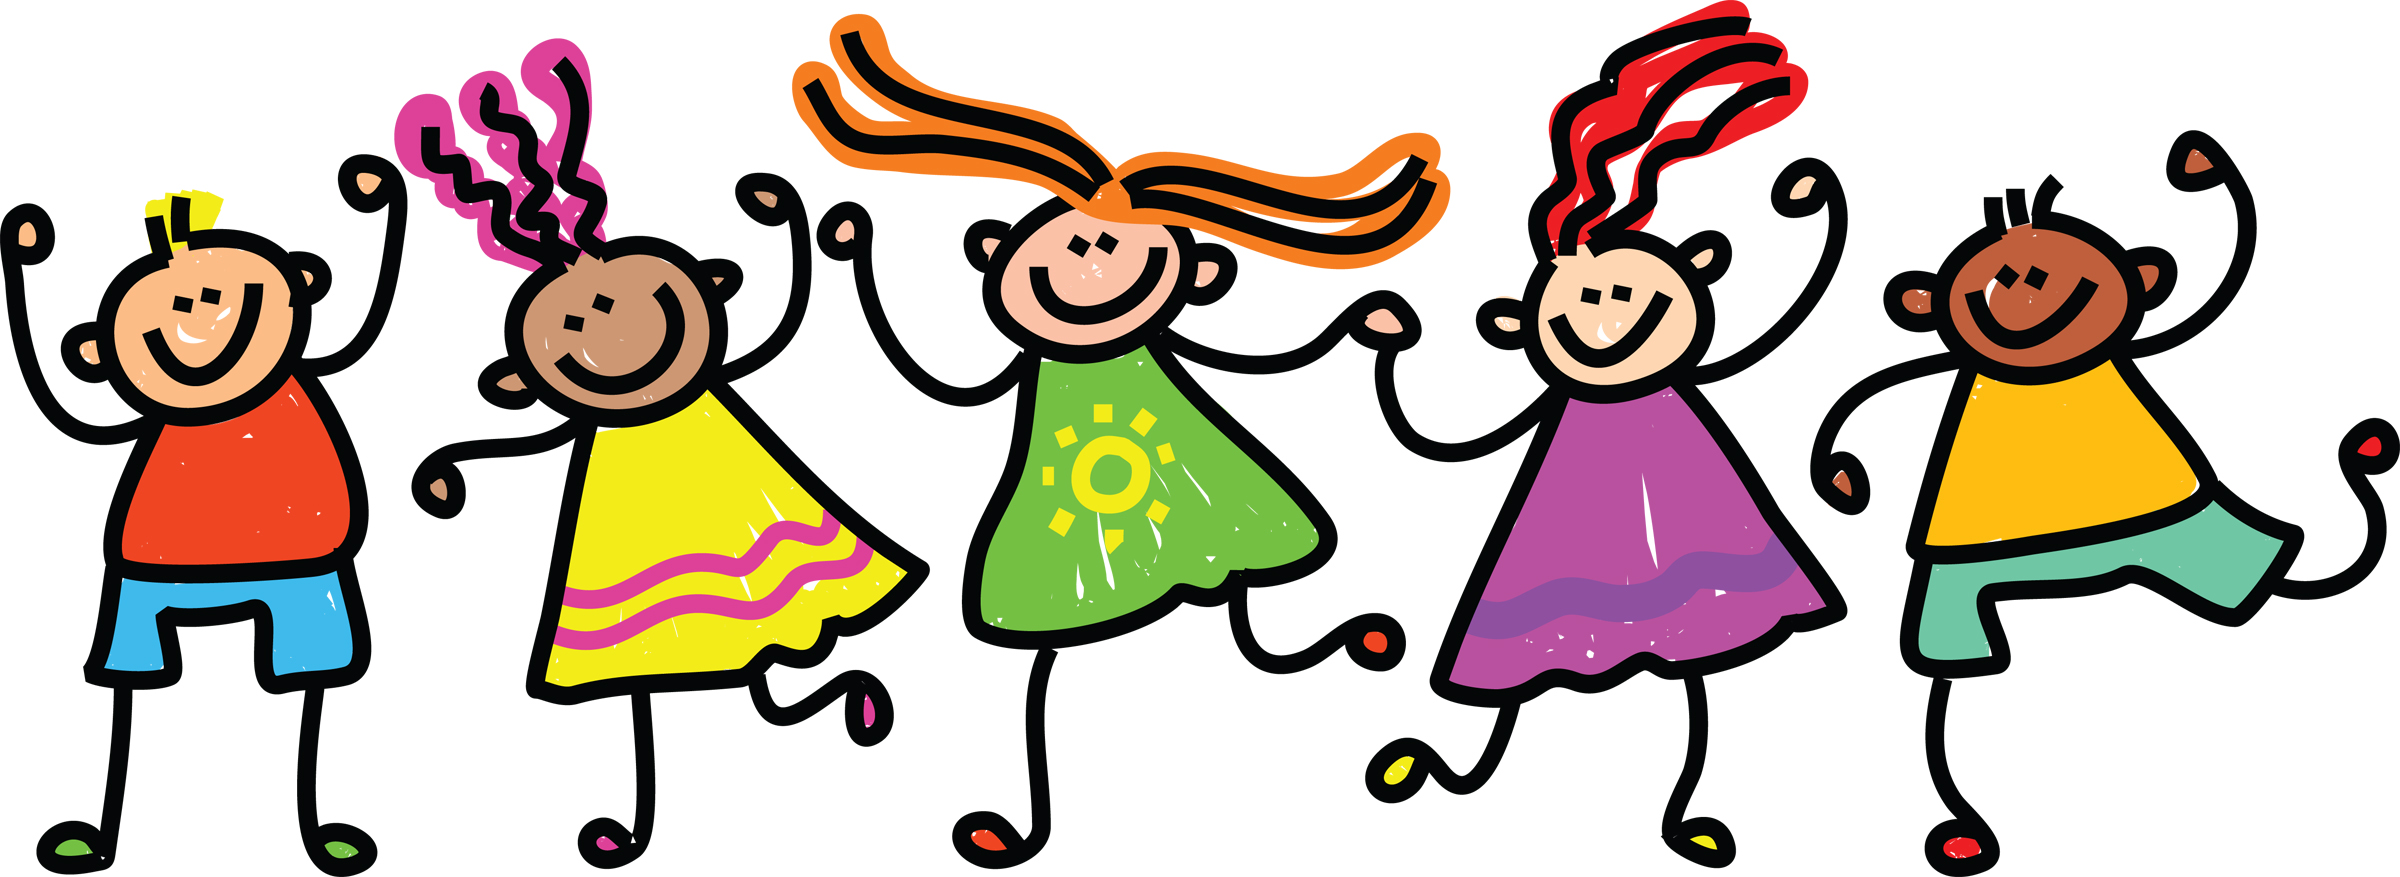 Excited Kids Images Transparent Image Clipart